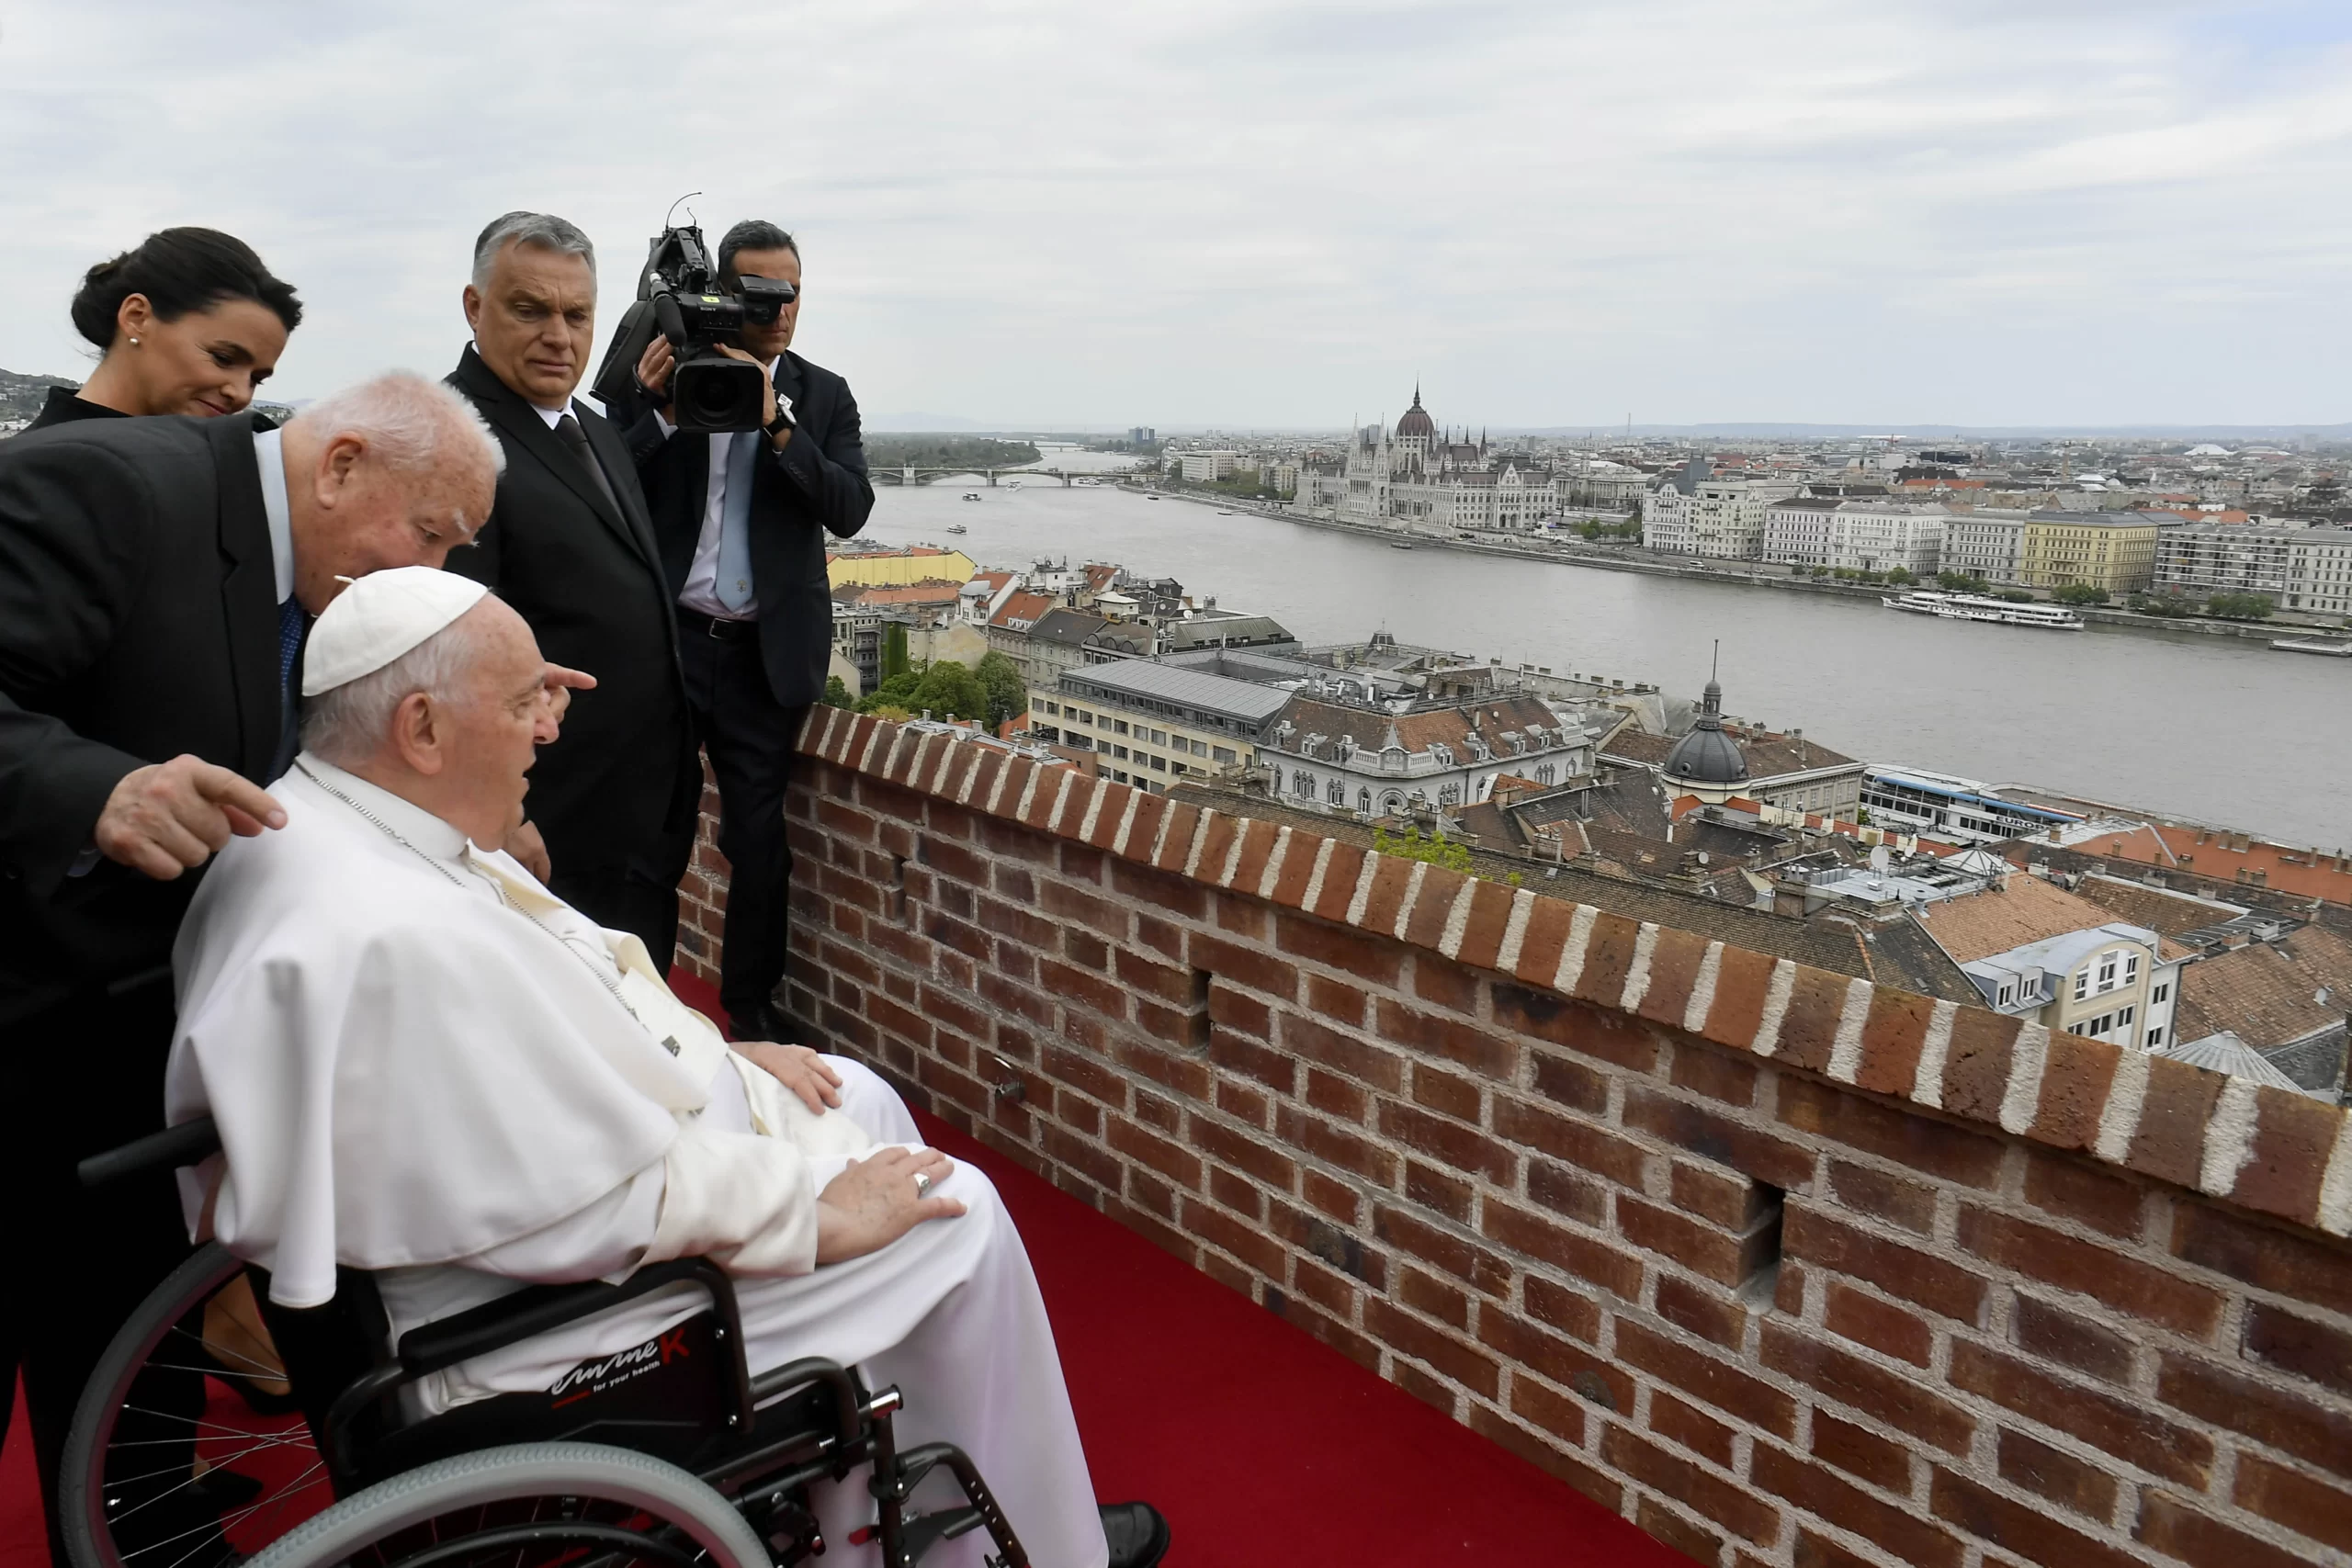 Pope Francis meets civil authorities and other dignitaries at a former a Carmelite monastery in Budapest, Hungary, on April 28, 2023, on the first day of his three-day pilgrimage to the country. Credit: Vatican Media